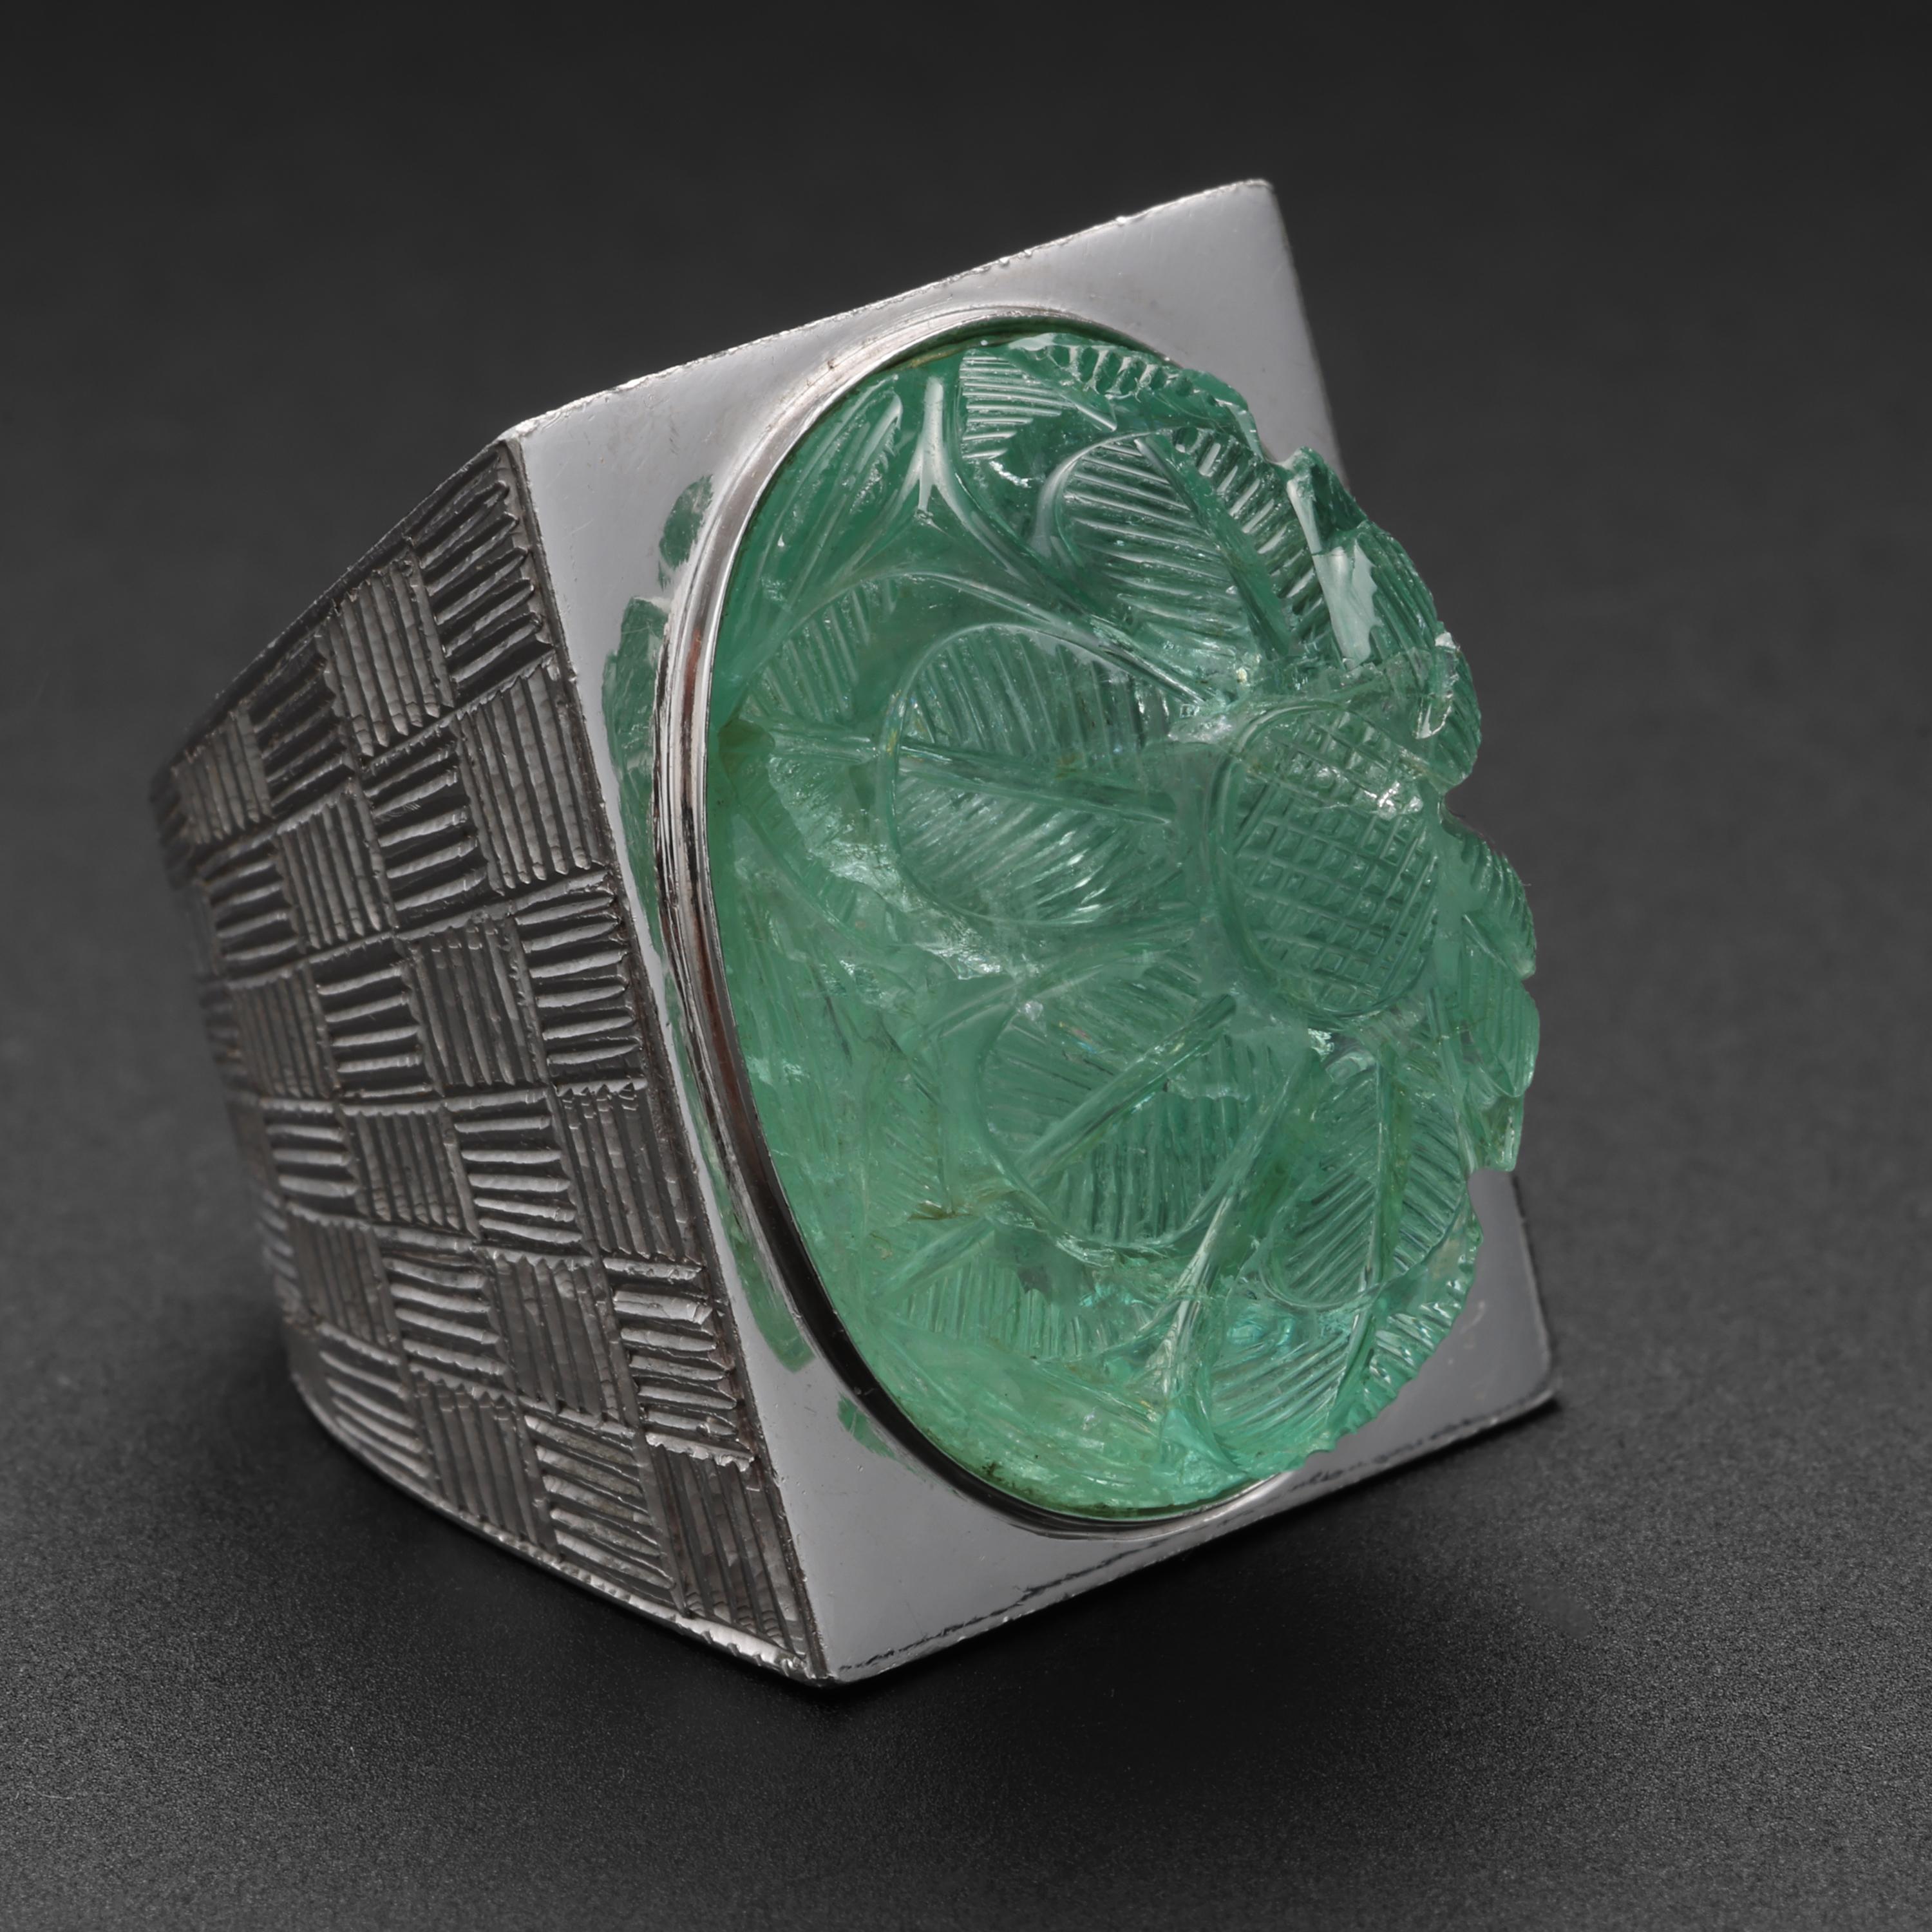 A massive, absolutely staggering 42 carat impeccably hand-carved natural Russian emerald that is so transparent it appears to be glass is the stunning focalpoint of this wildly original and incredibly impressive ring. 

The angular, modernist